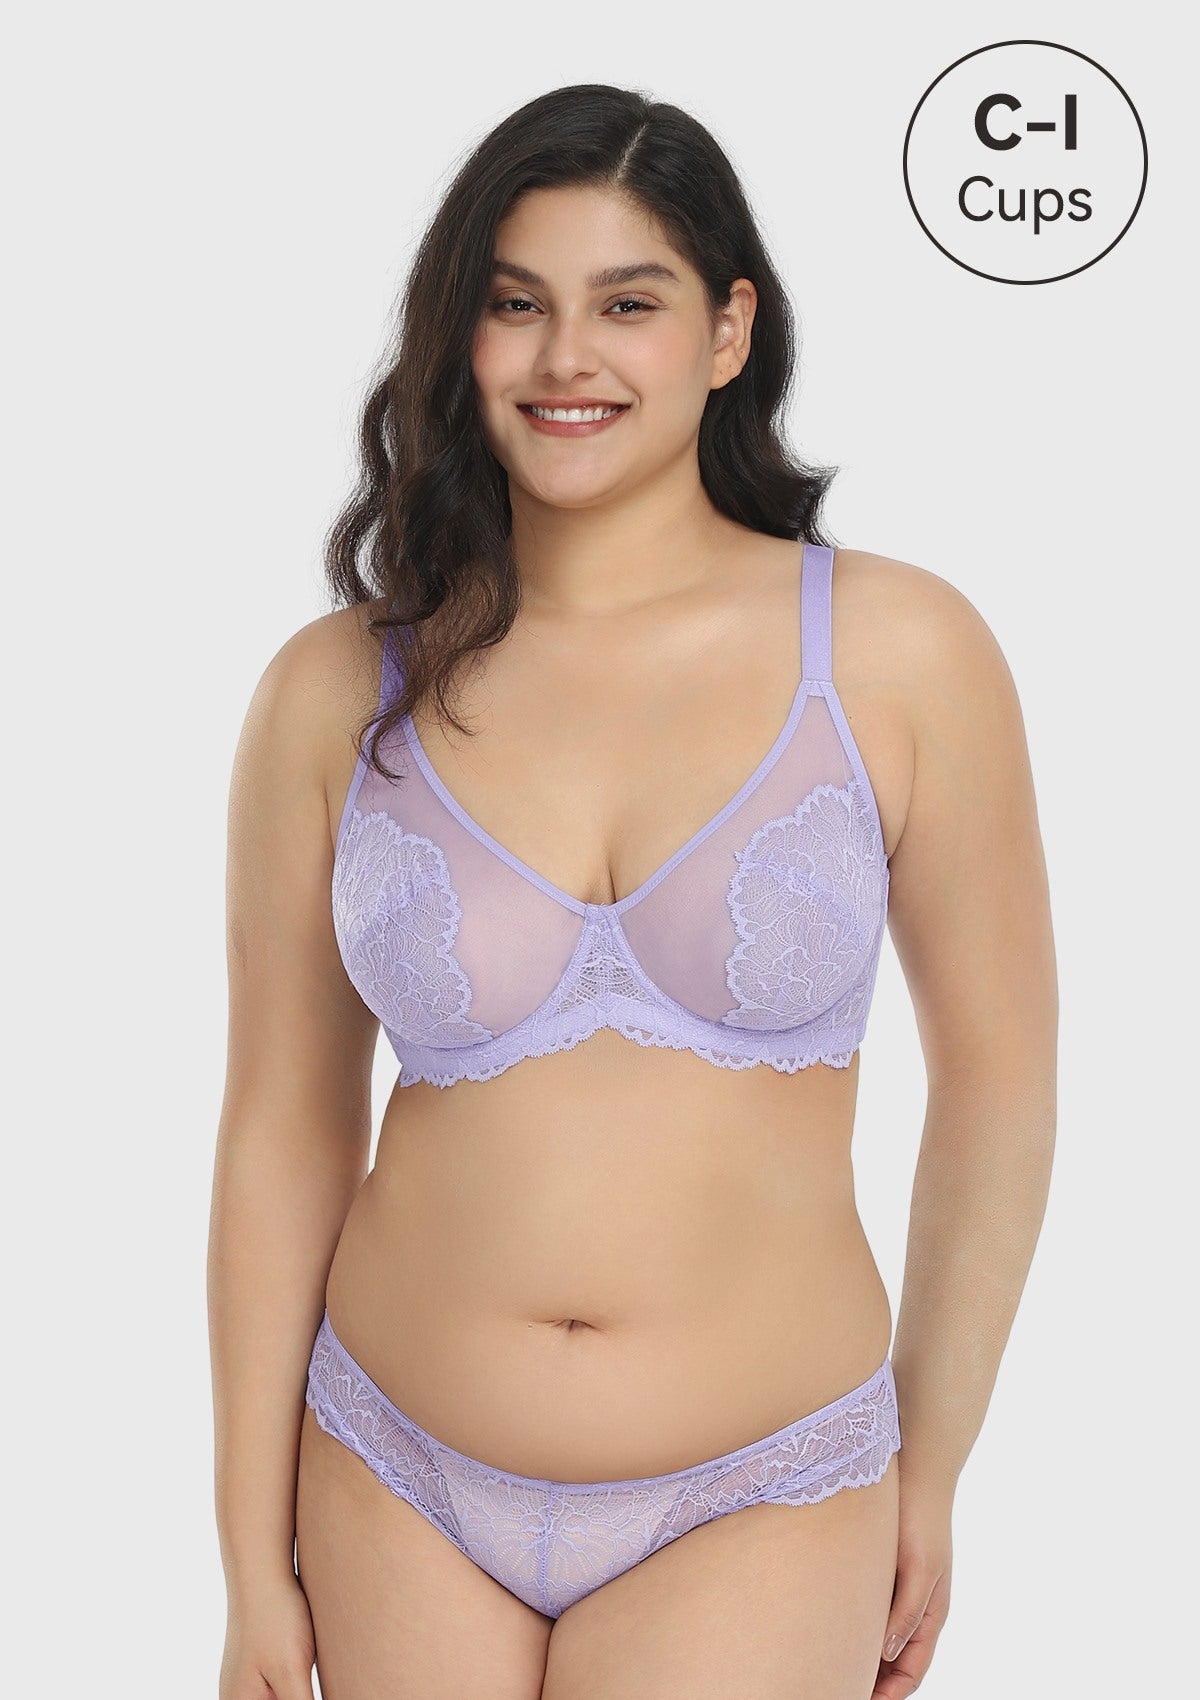 HSIA Blossom Transparent Lace Bra: Plus Size Wired Back Smoothing Bra - Light Purple / 34 / DDD/F